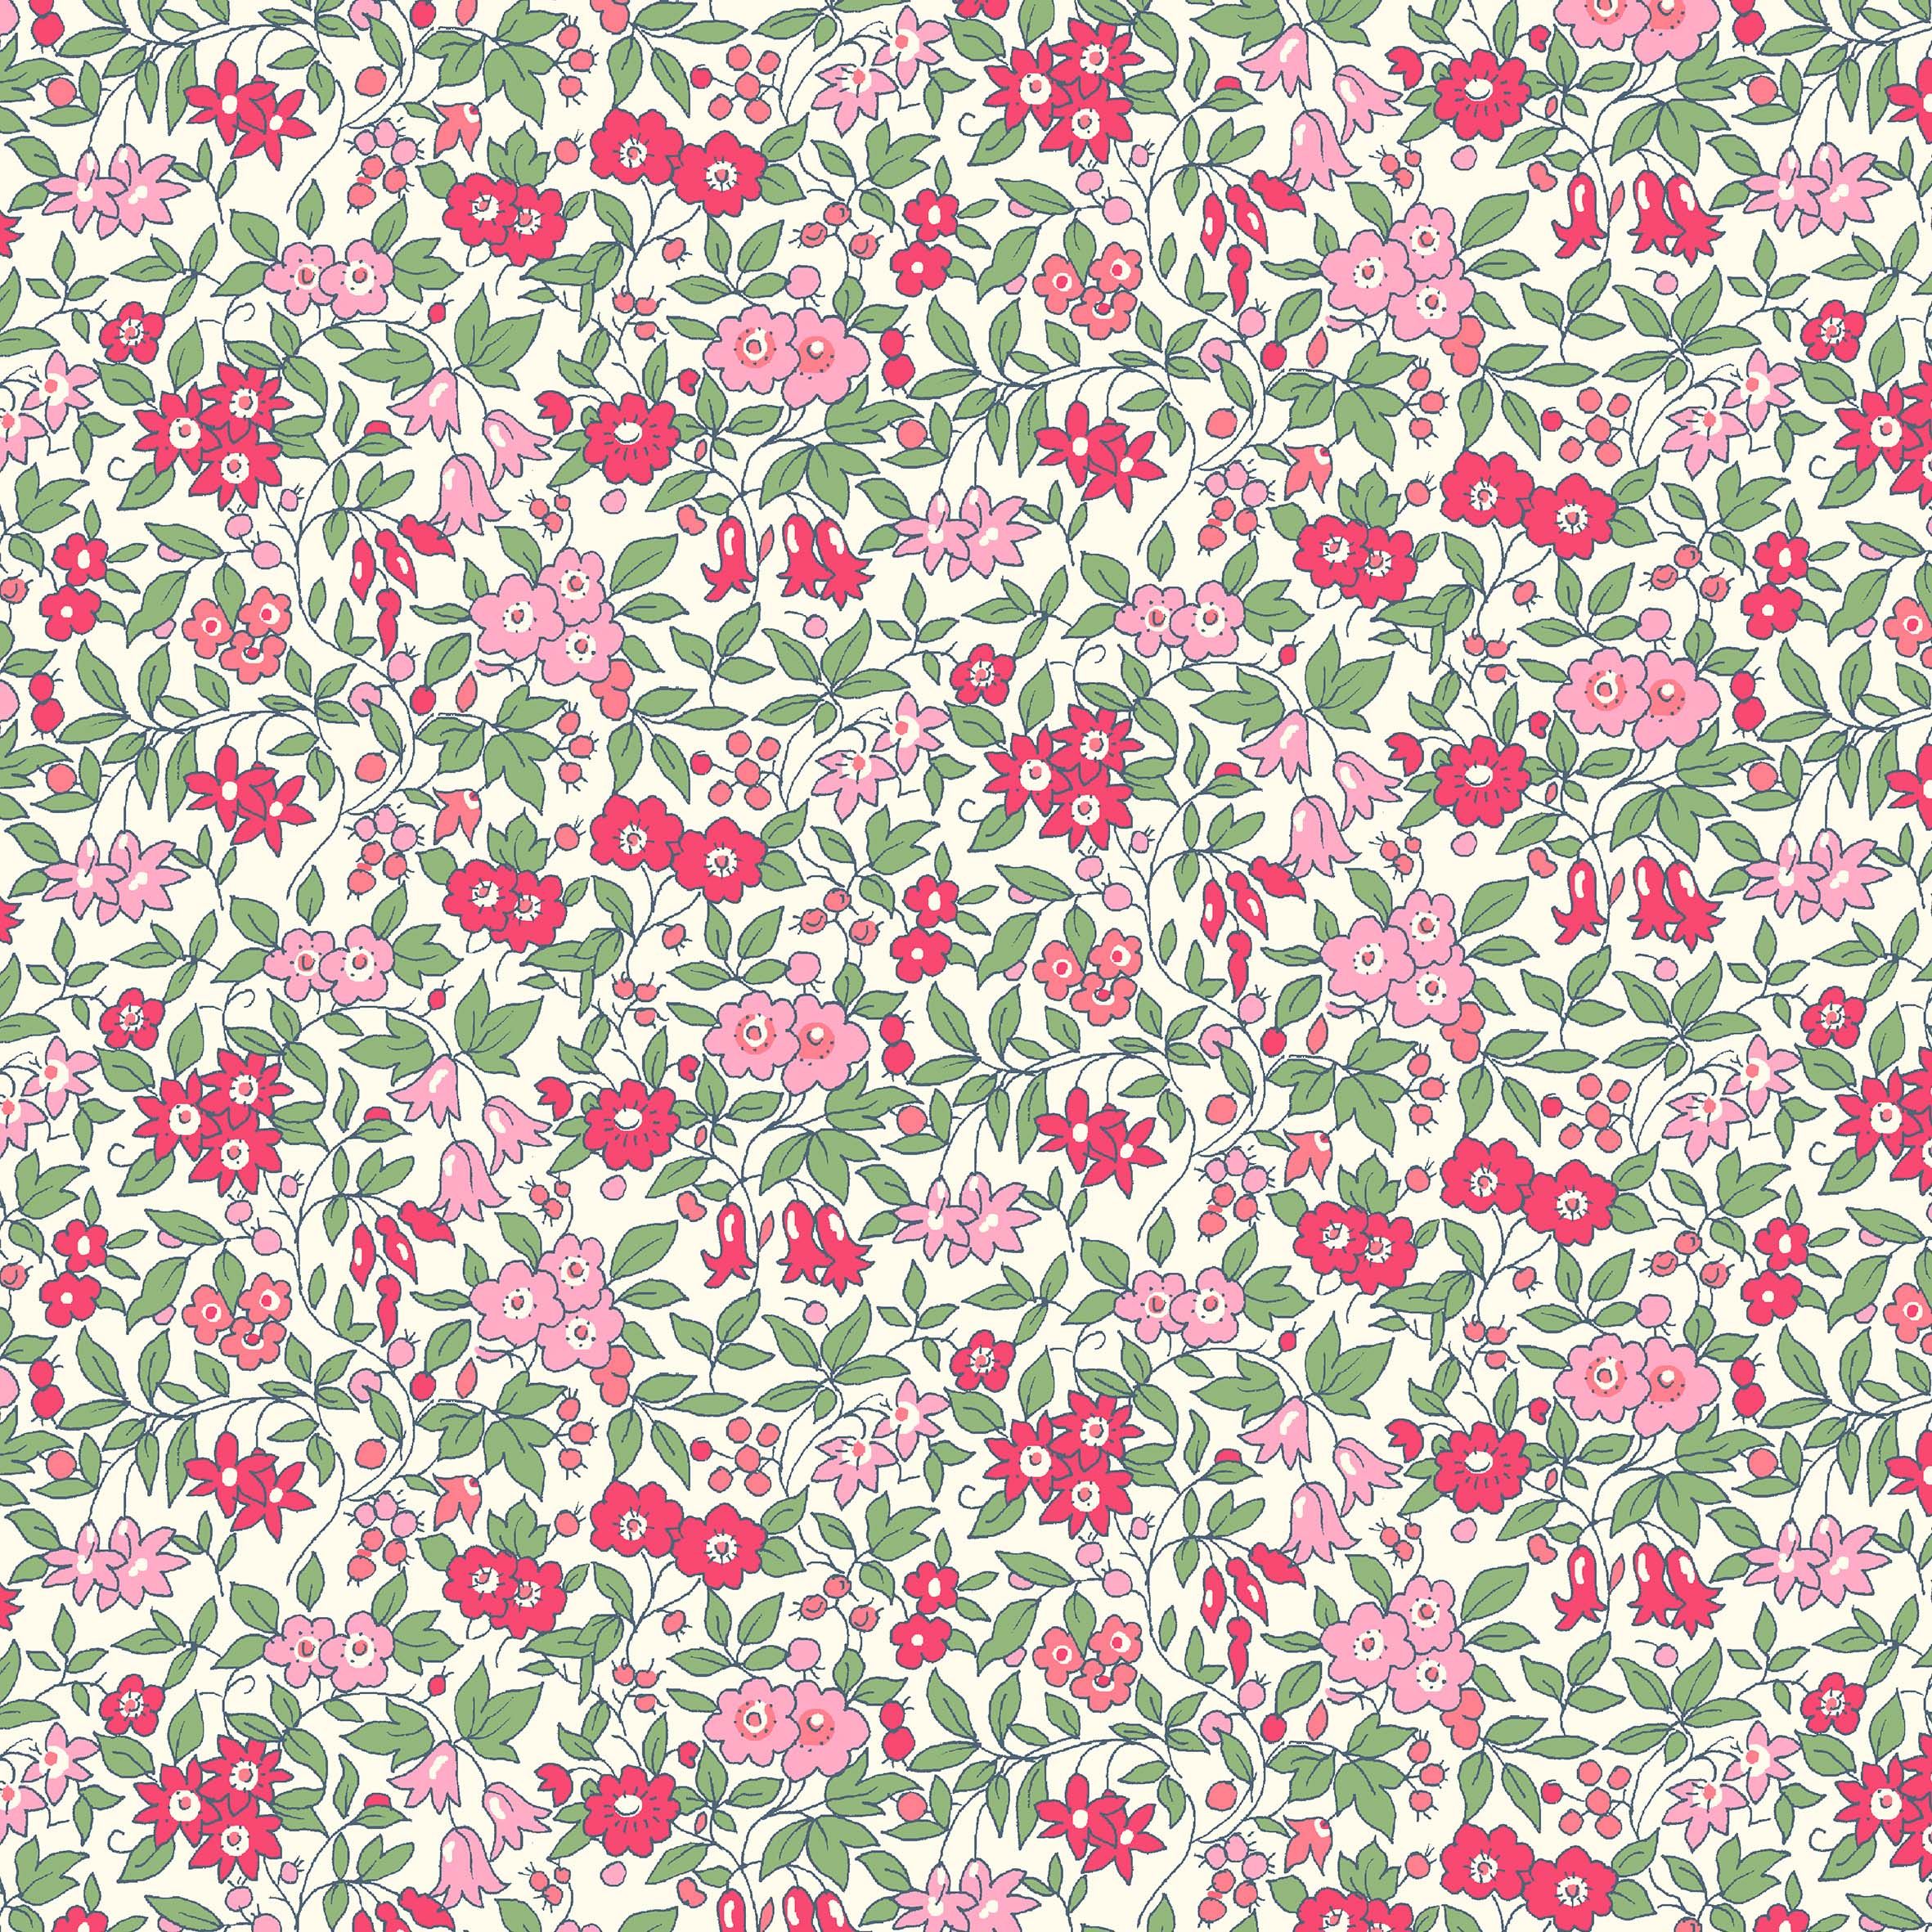 Liberty Fabric, Show Mid Forget Me Not Blossom Pink. Beautiful Lasenby Cotton for quilting, patchwork sewing projects. – The Stitchery Dorset